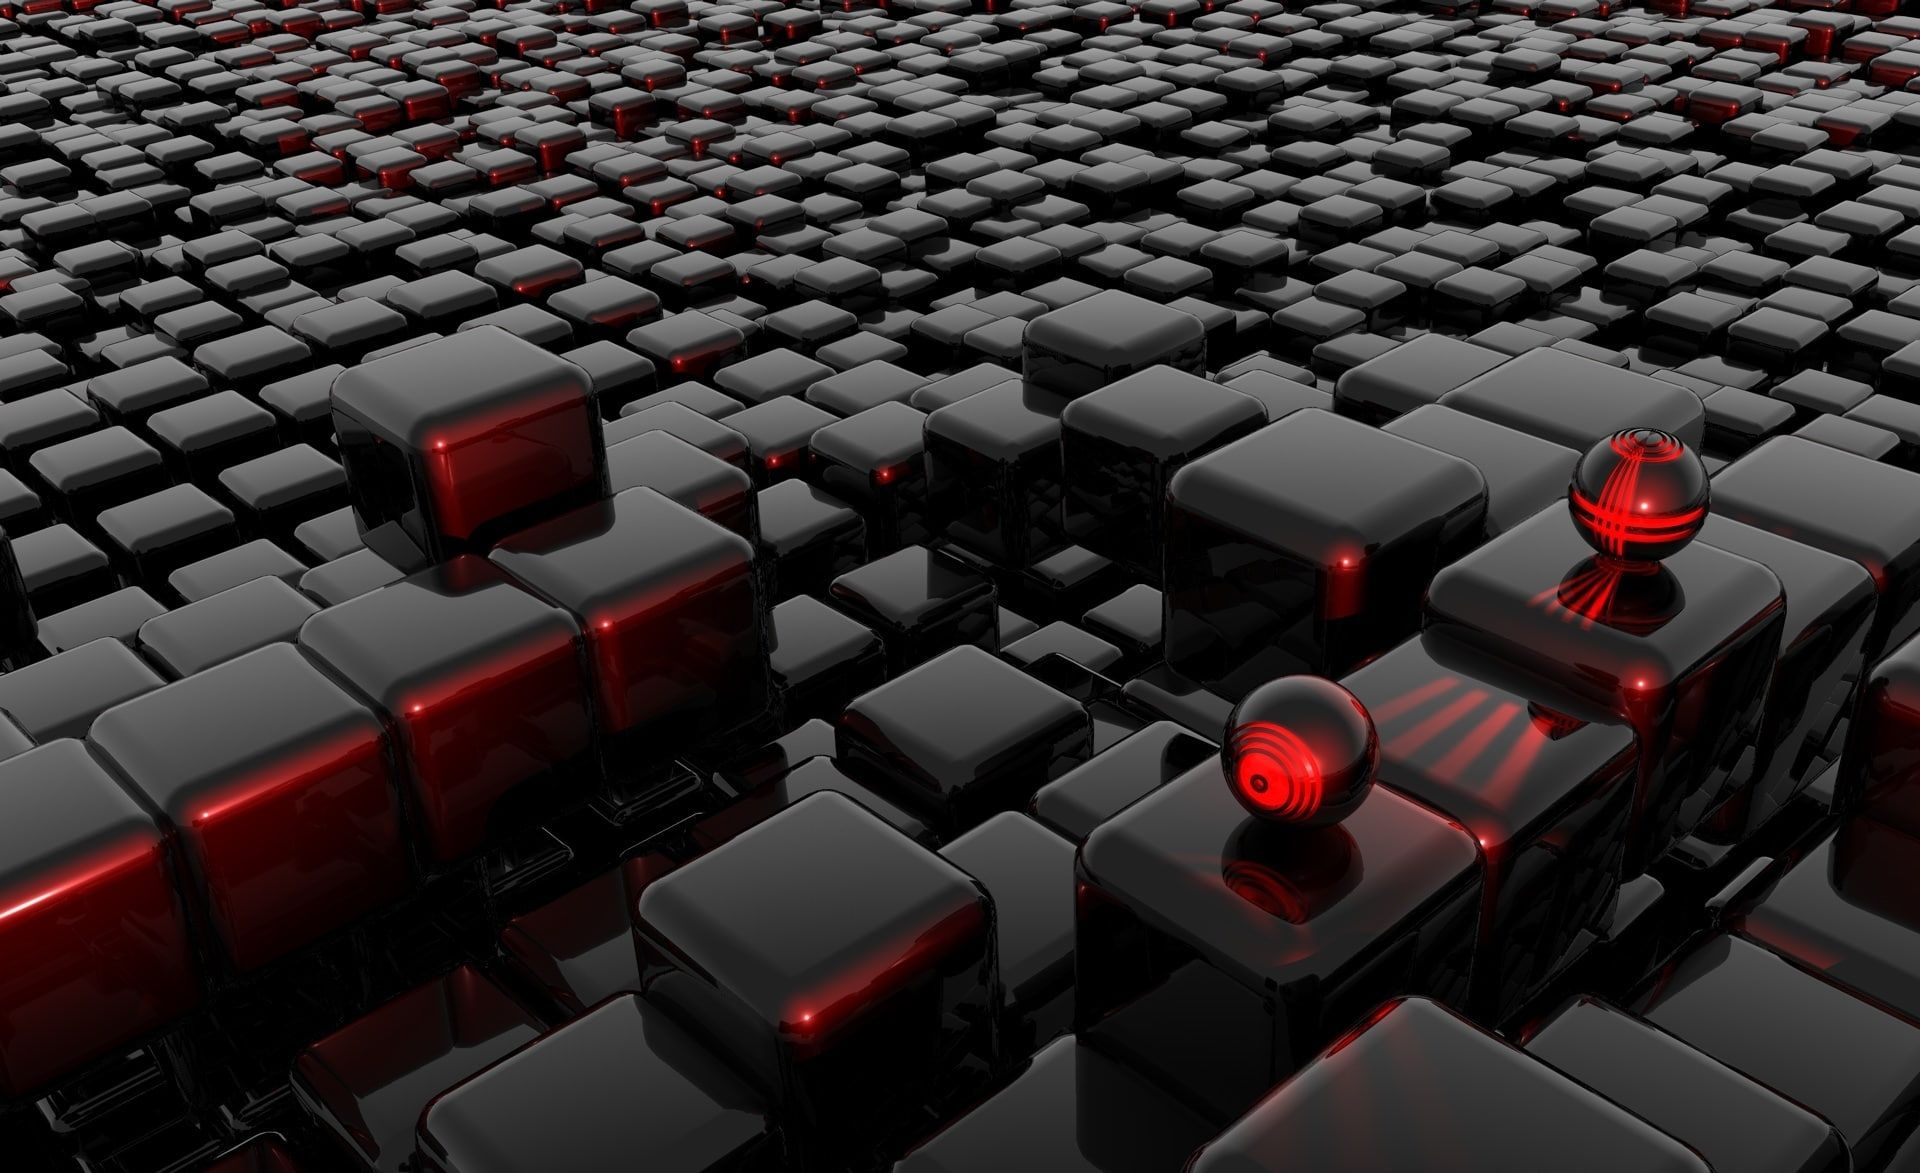 1920x1173 Chase 3D, red glowing ball and cubes digital wallpaper #Artistic #Abstract #Chase #1080P #wallpaper &acirc;&#128;&brvbar; | 3d desktop wallpaper, Digital wallpaper, 3d wallpaper for pc